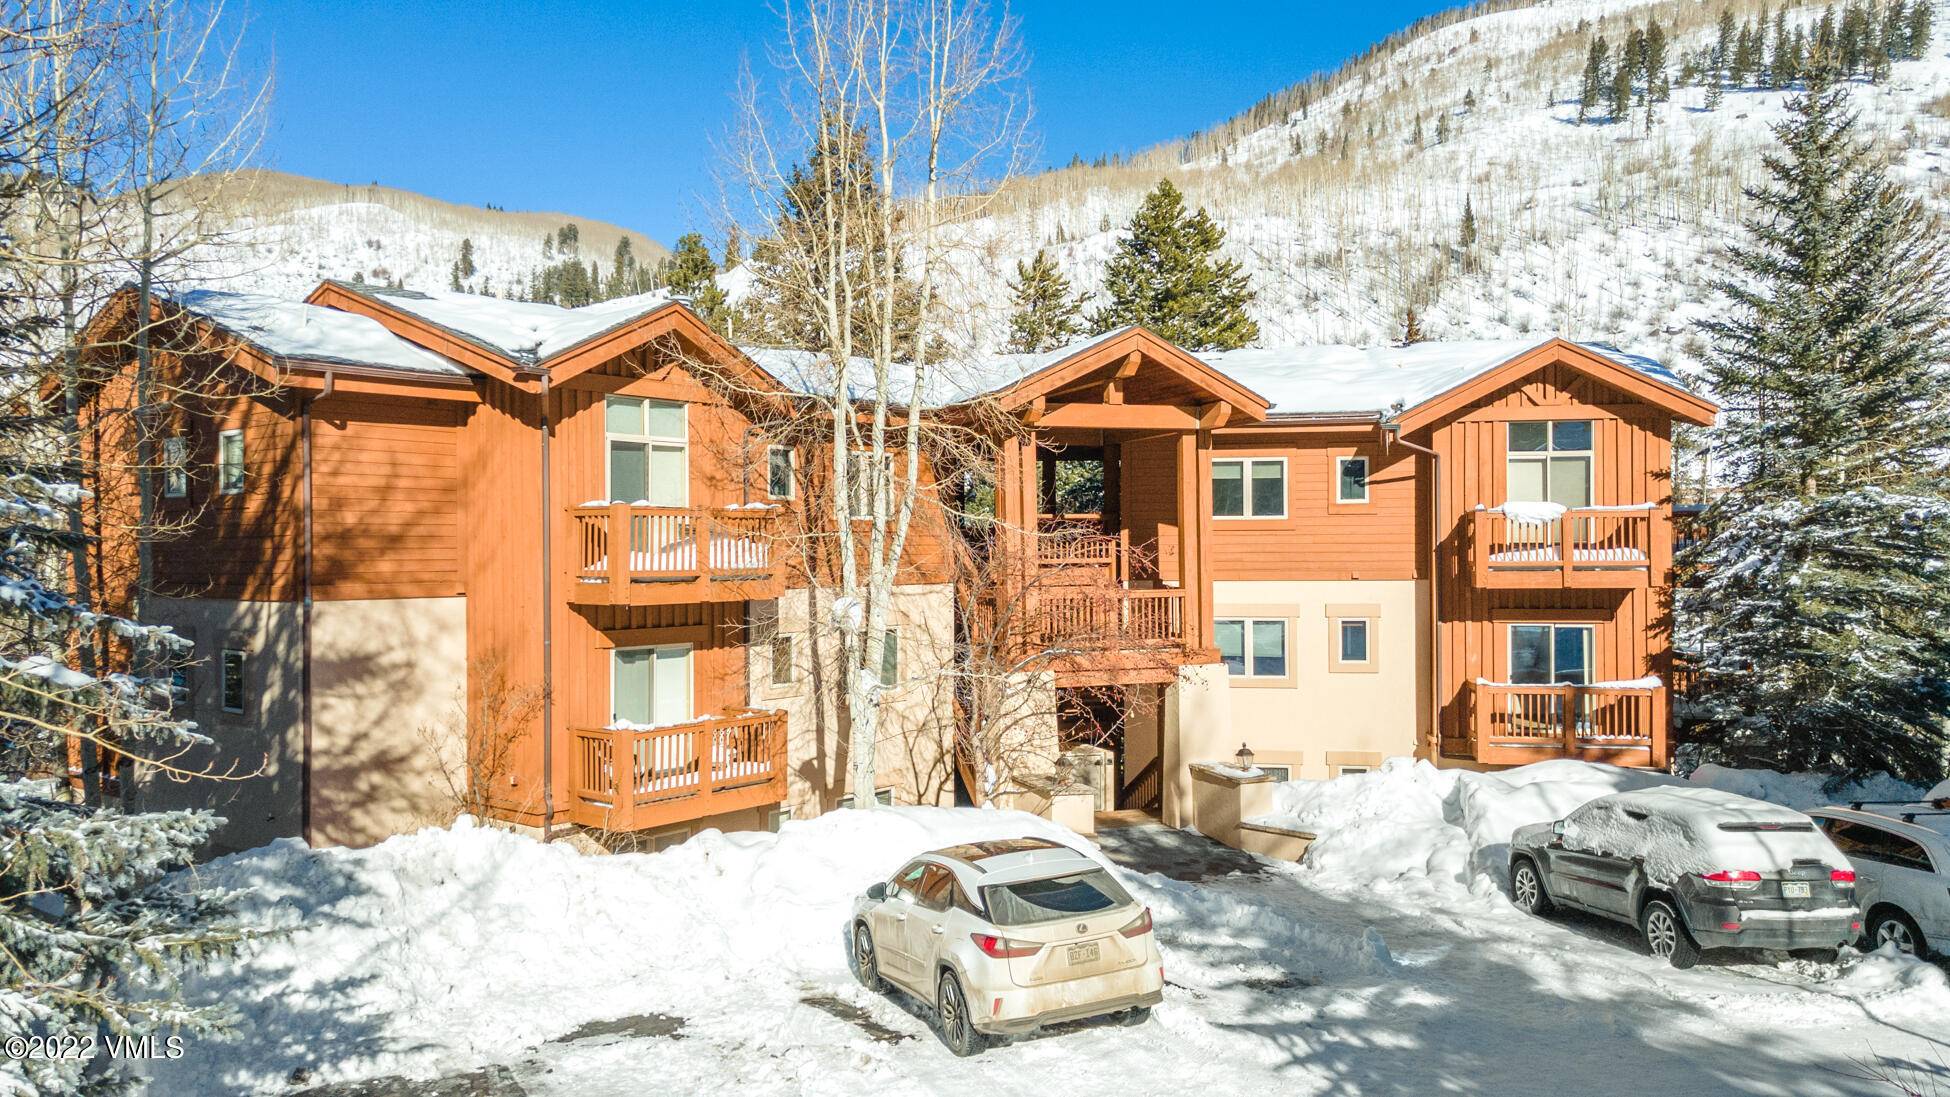 This 2 bedroom and 2 full bath condominium is located in the very popular neighborhood of East Vail.